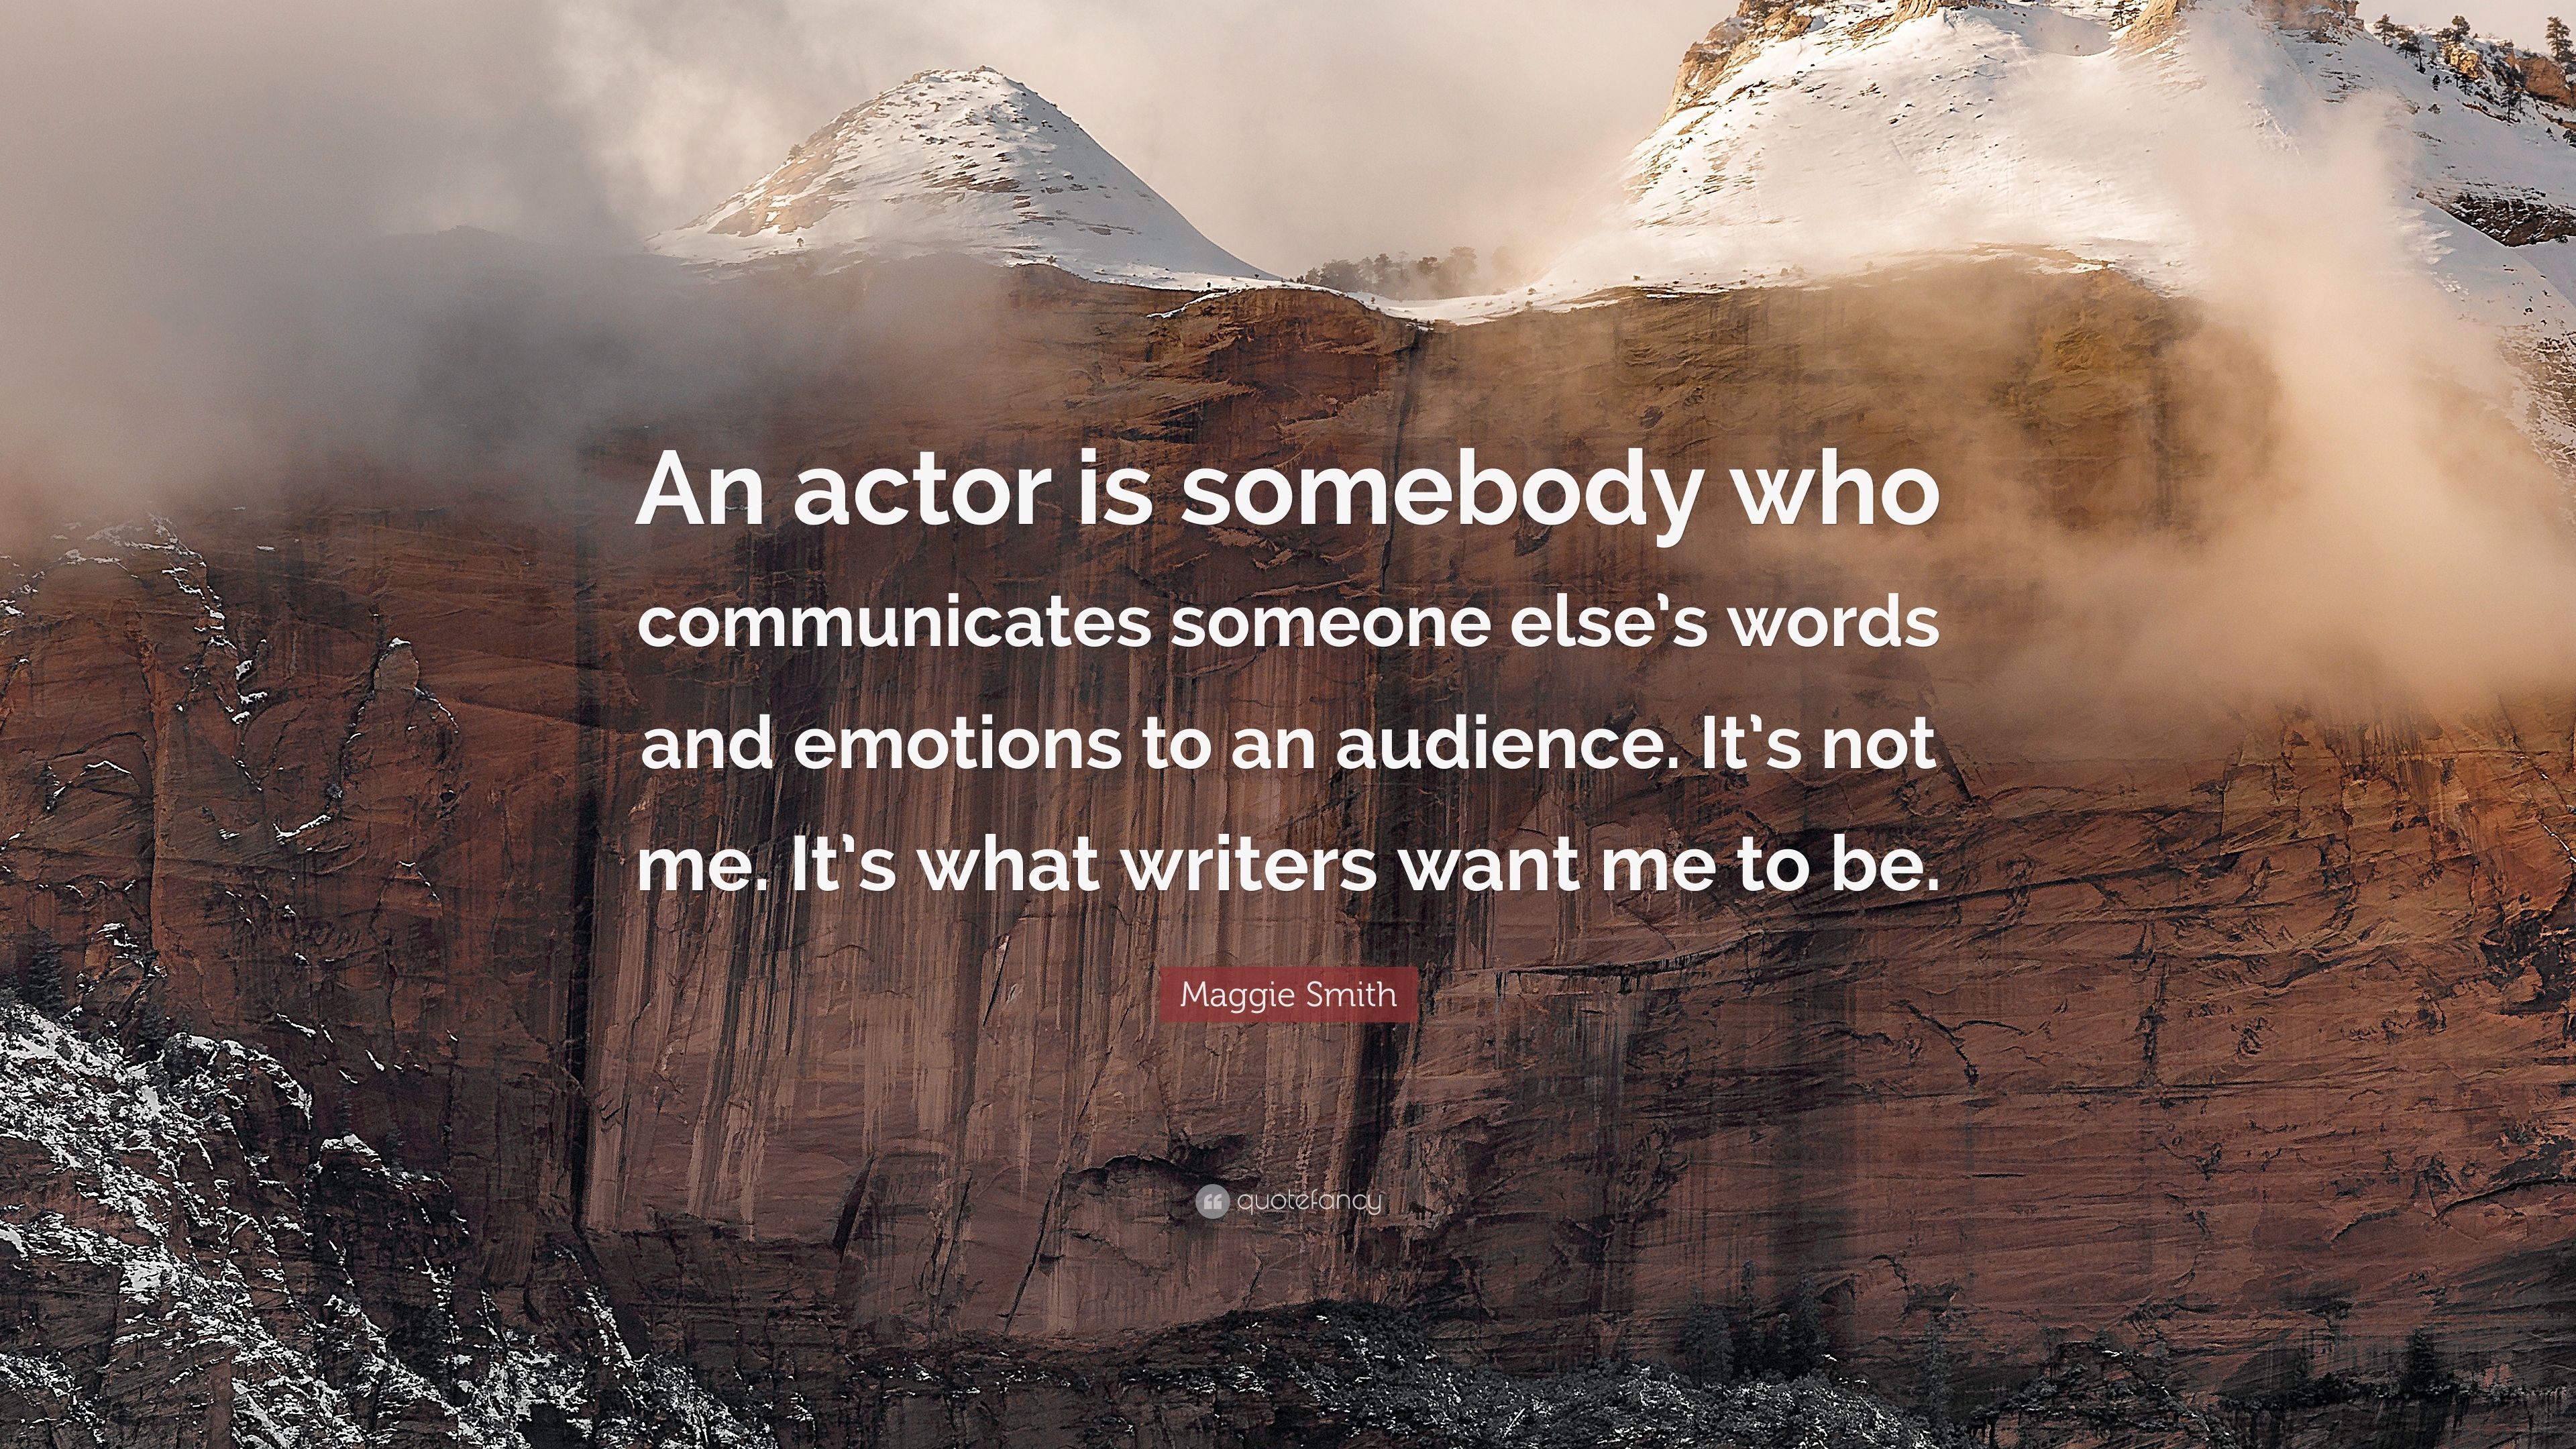 Maggie Smith Quote: “An actor is somebody who communicates someone